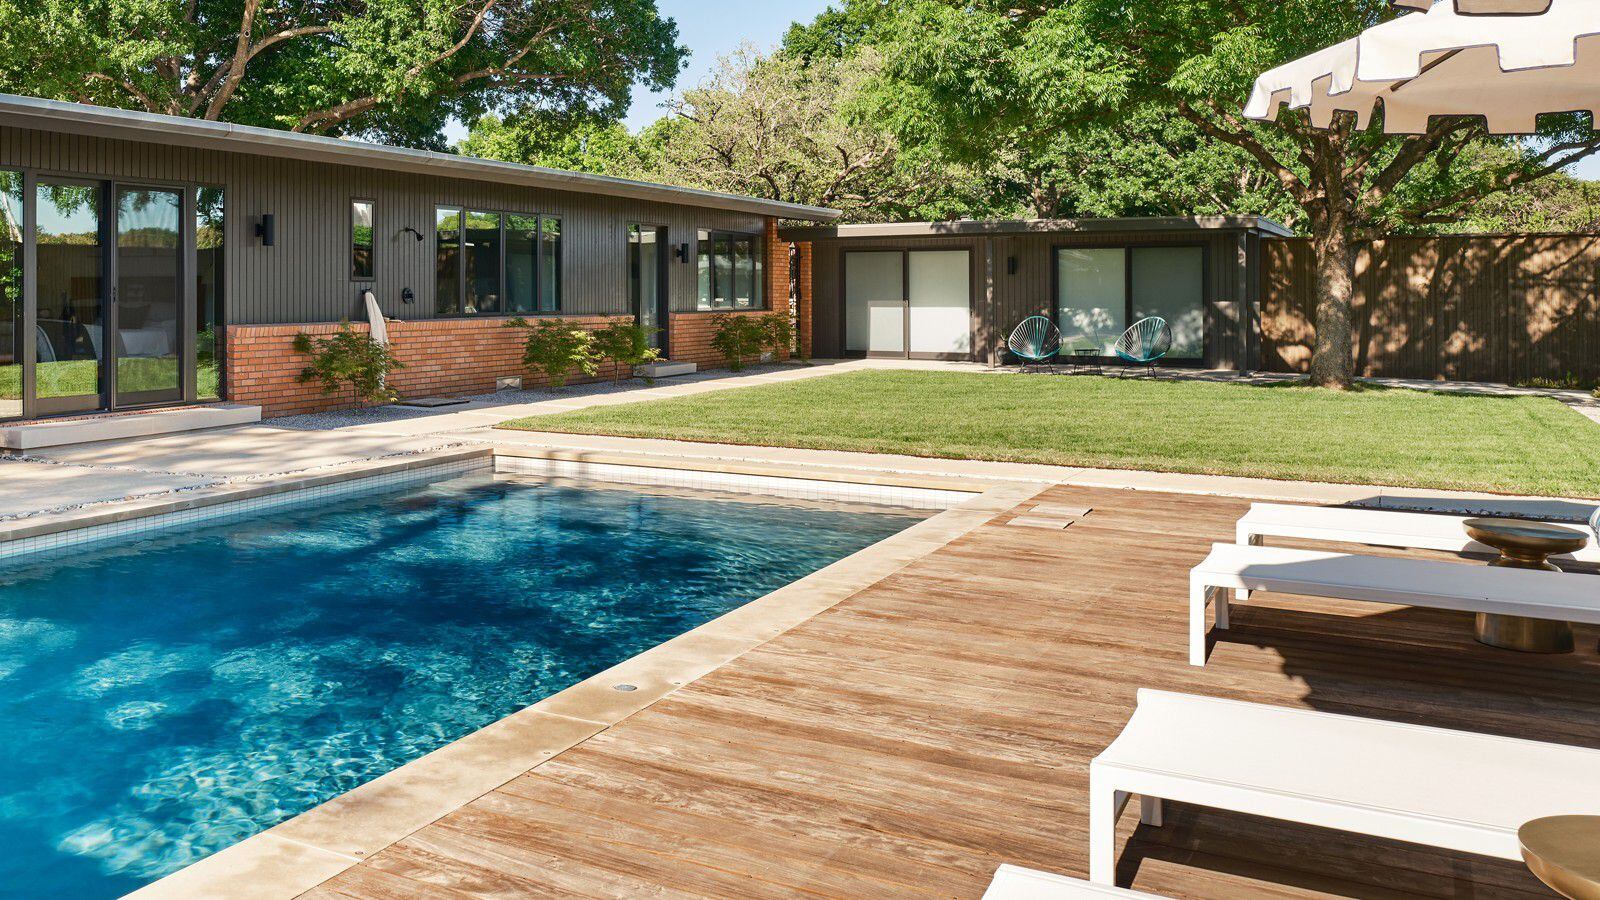 A midcentury modern home features a backyard with a pool.